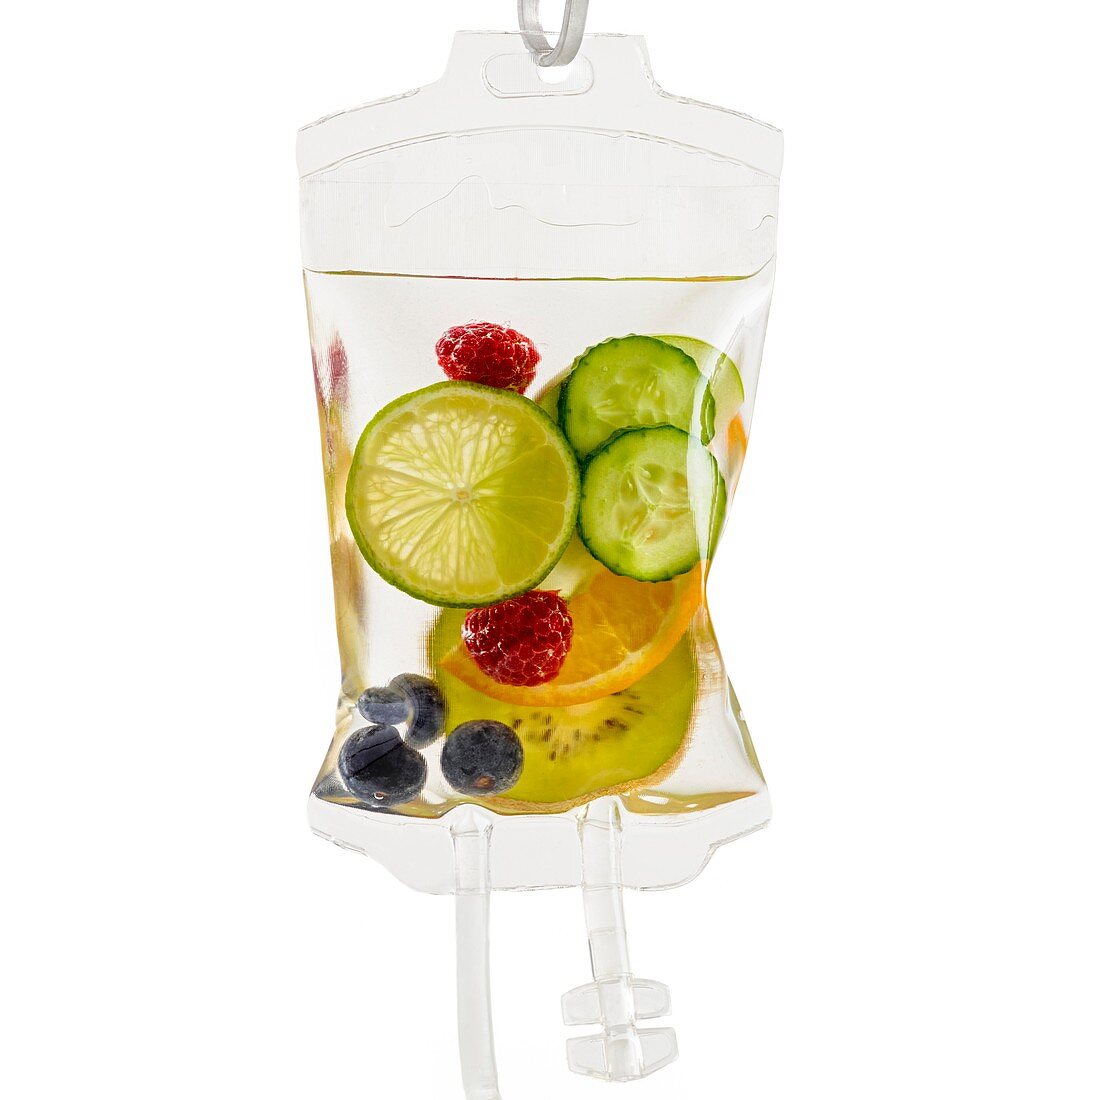 IV bag with fruits